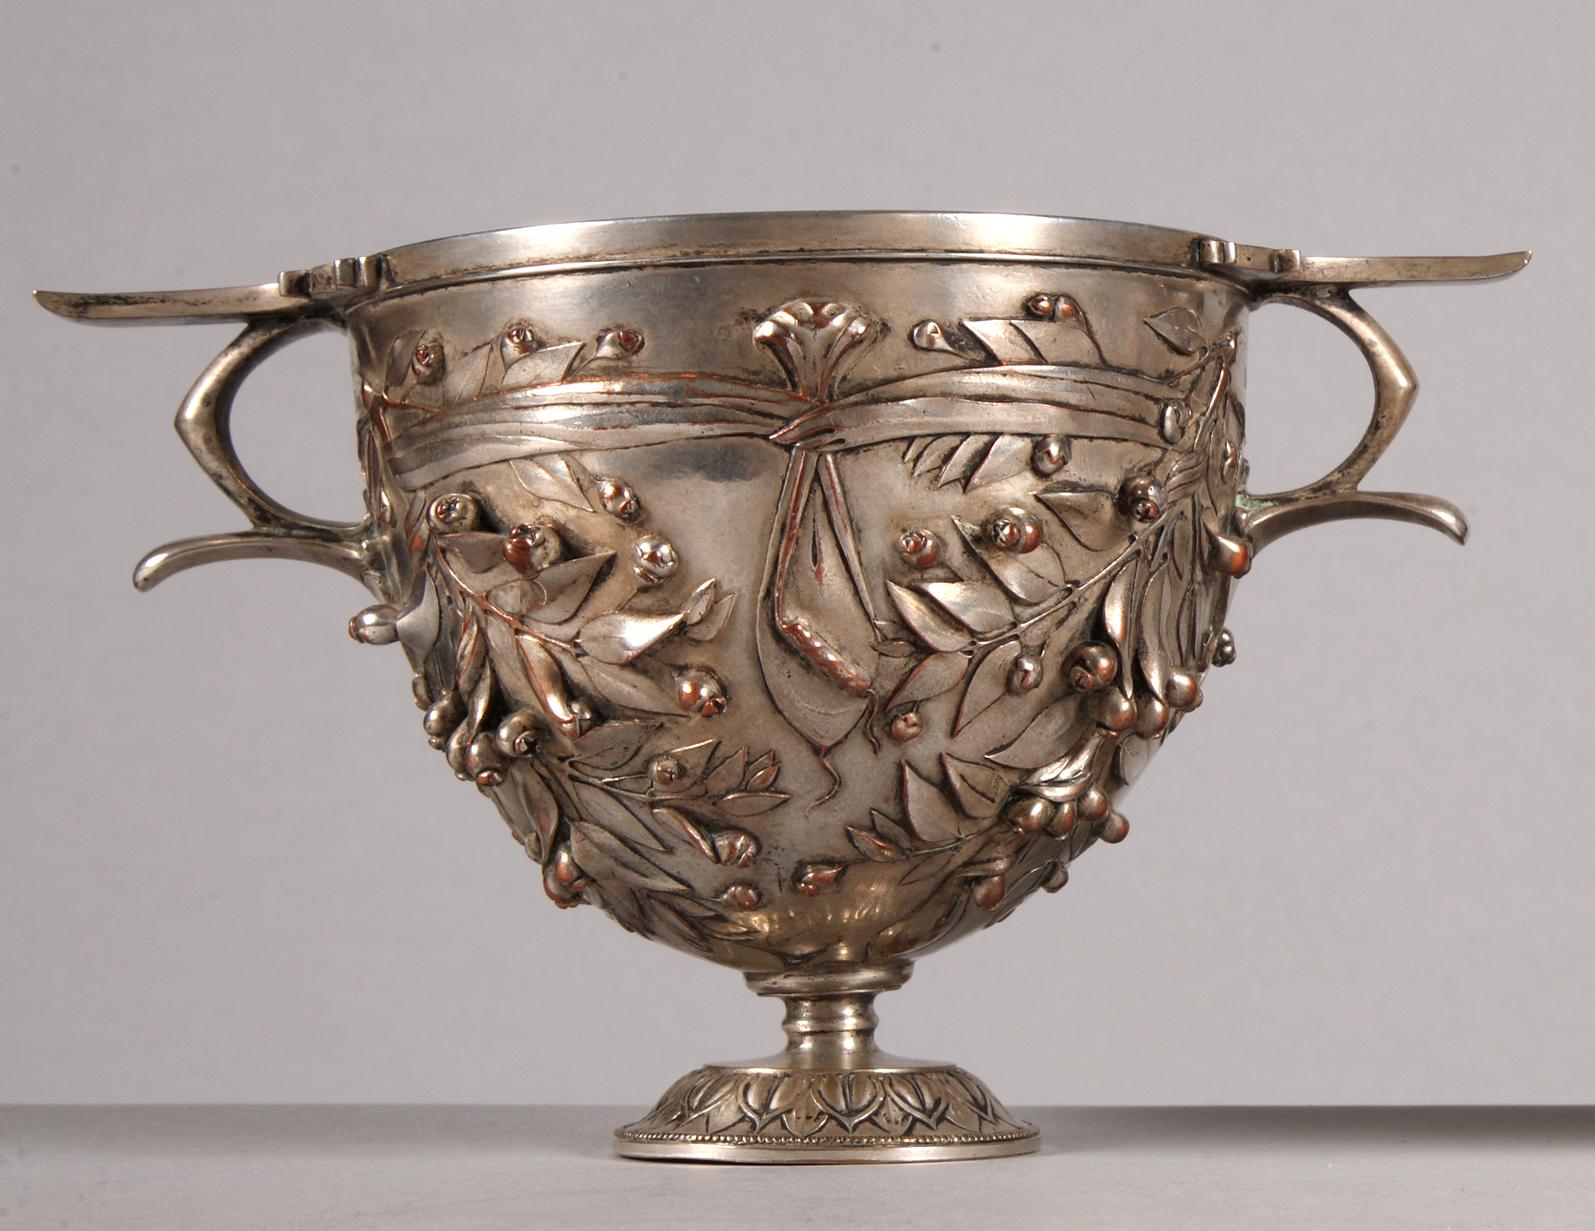 Signed Désiré Attarge Fit and F. Barbedienne Paris

Pair of silvered bronze cups, chased by Désiré Attarge after an antique model (Ist Century), known as the Coupe d’Alésia or Canthare d’Alise-Sainte-Reine (now preserved at Antiquités Nationales